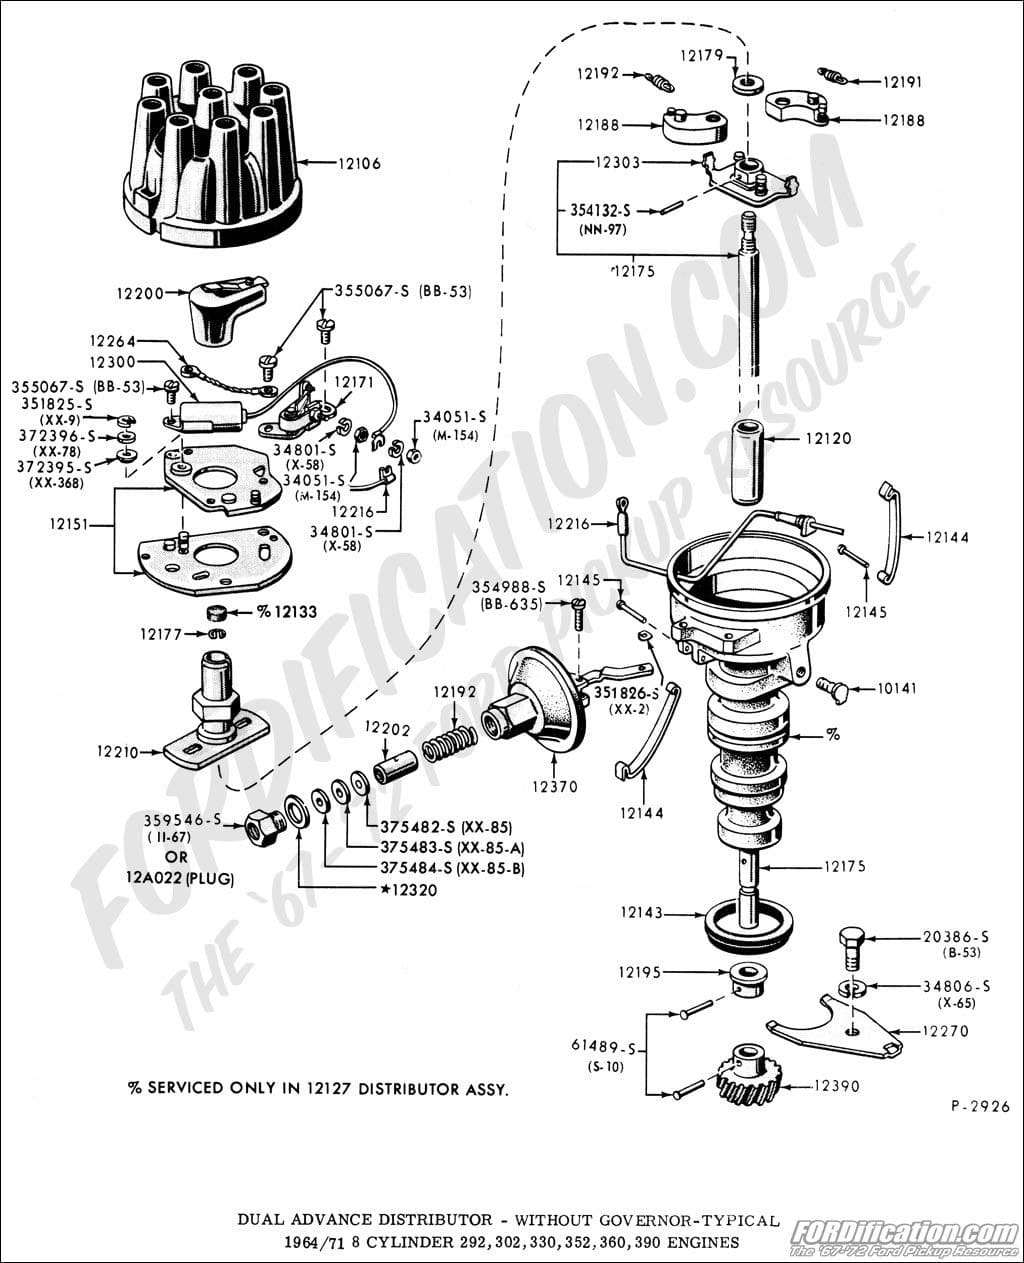 Steel Vacuum Line Part #? - Ford Truck Enthusiasts Forums 1979 mgb starter wiring diagram 